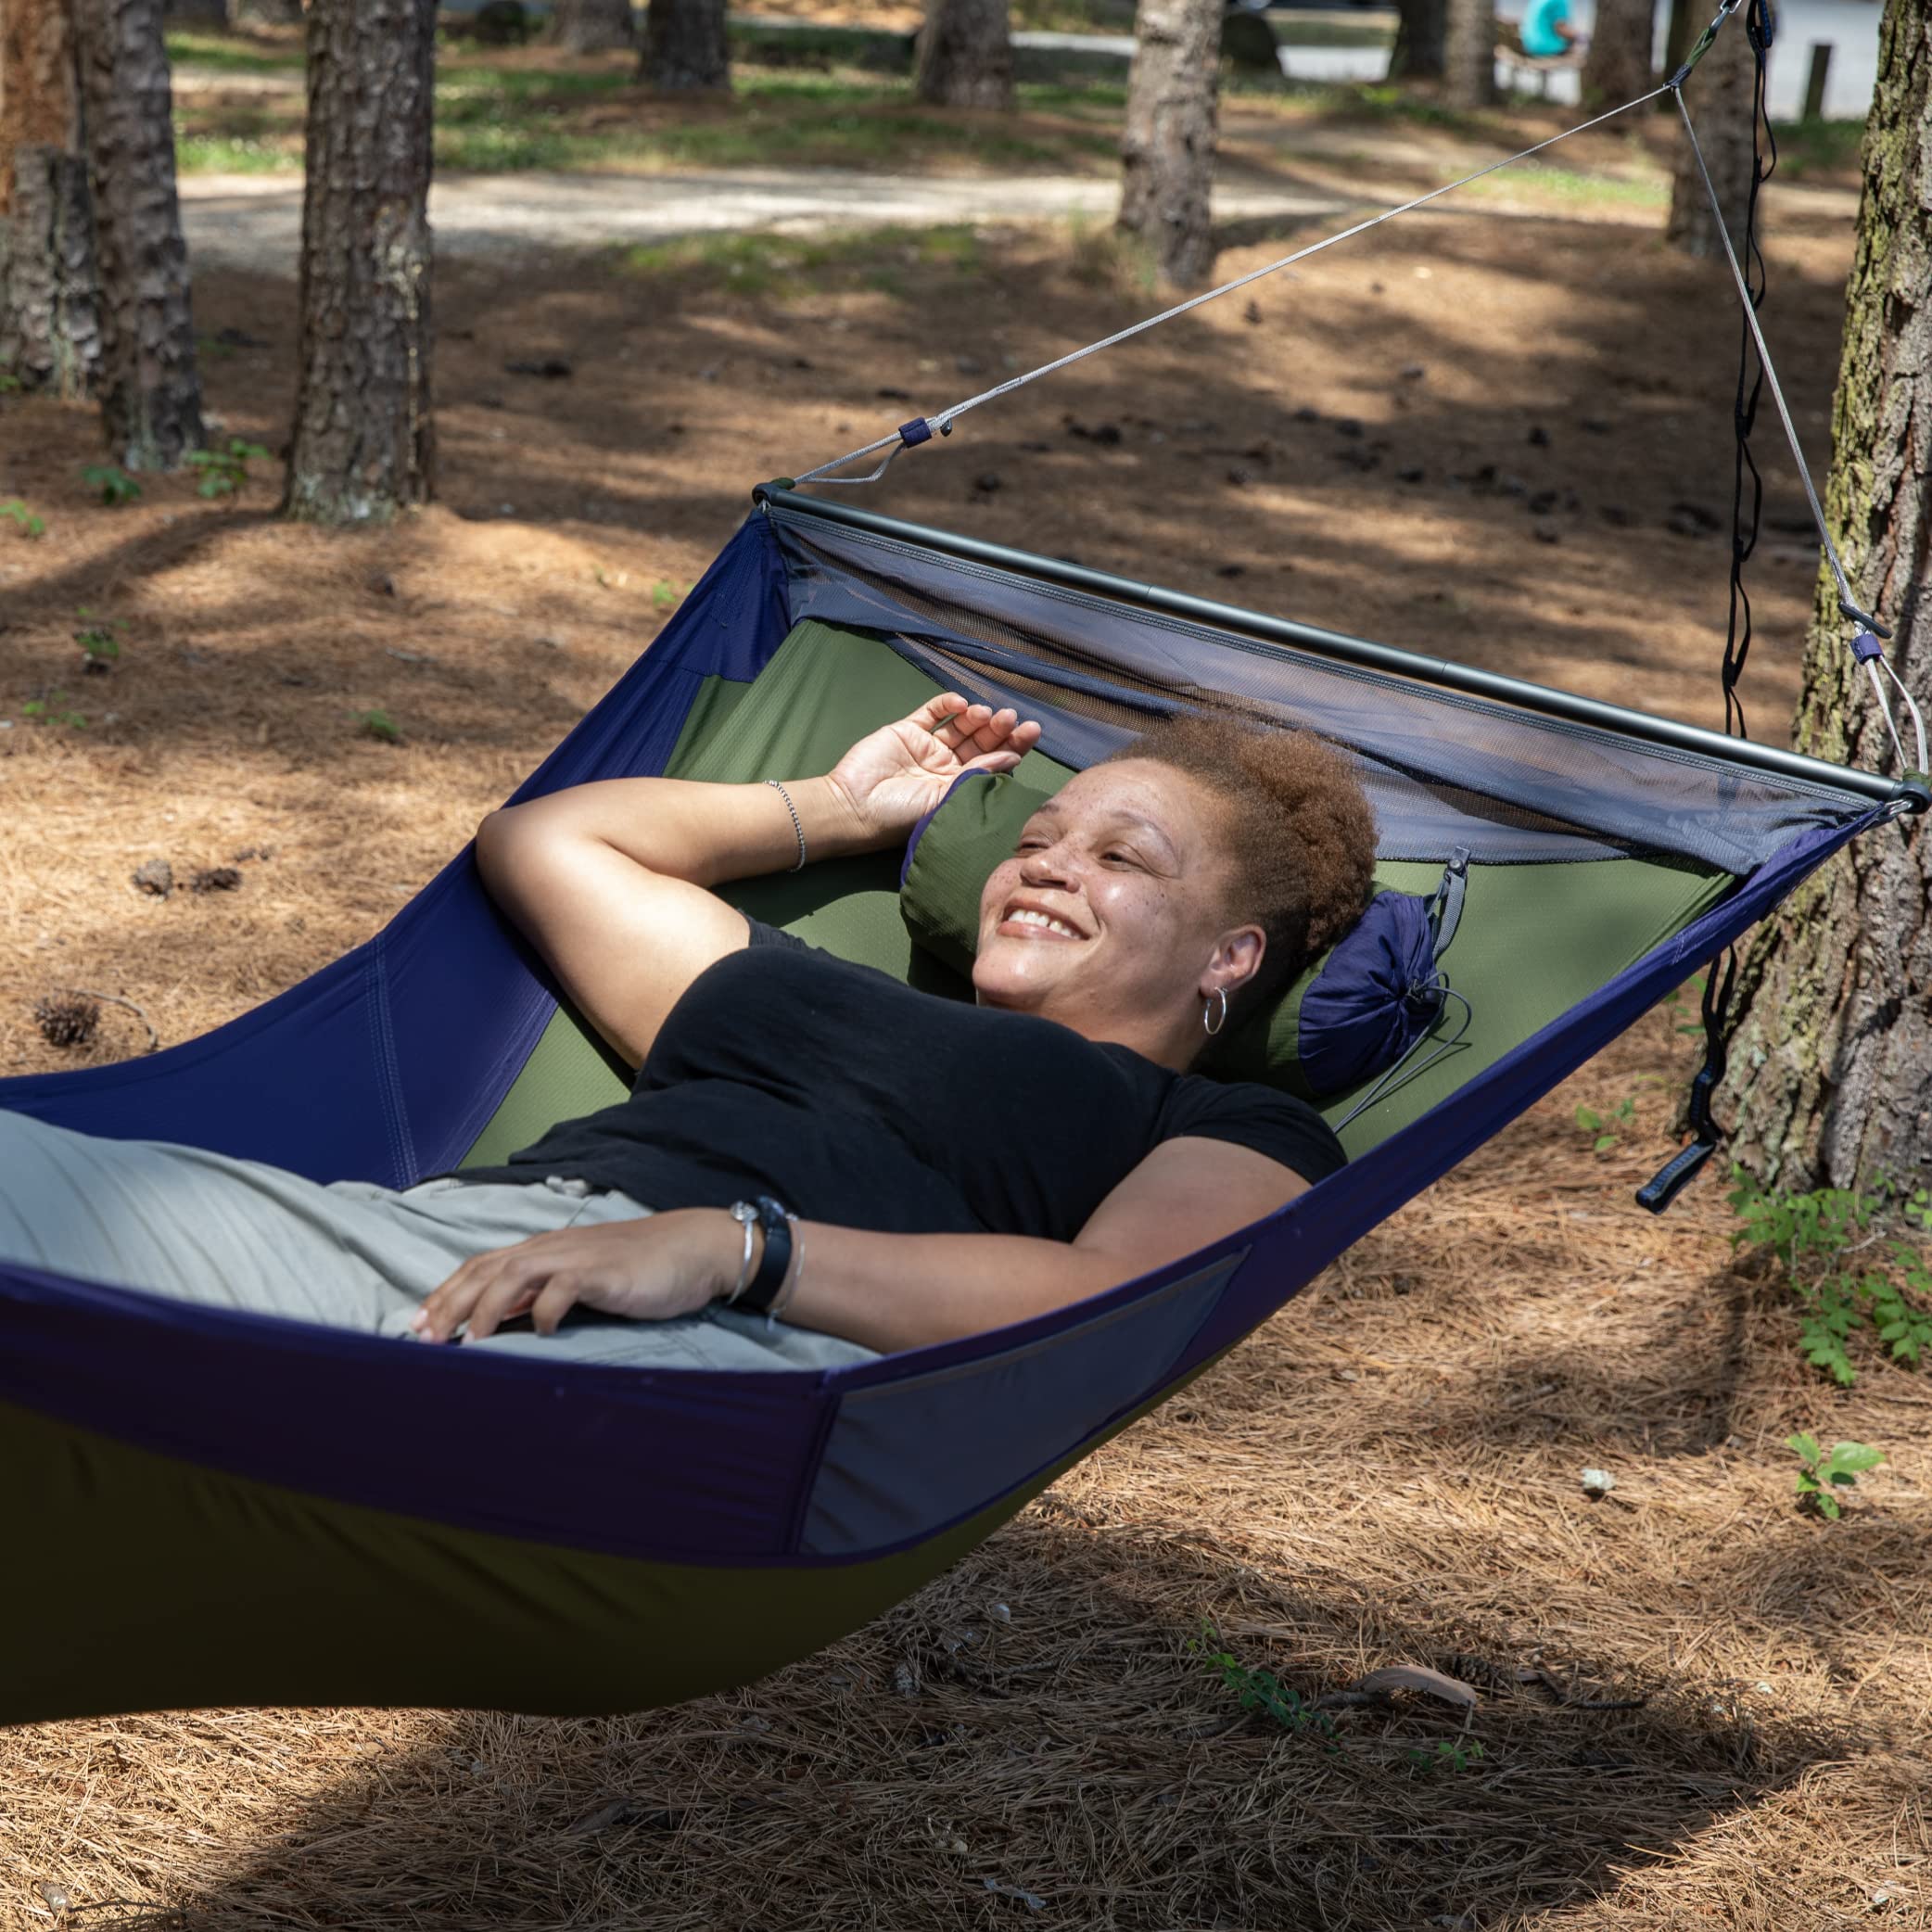 ENO Skyloft Hammock - 1 Person Portable Hammock - for Camping, Hiking, Backpacking, Travel, Festival, or The Beach - Navy/Olive